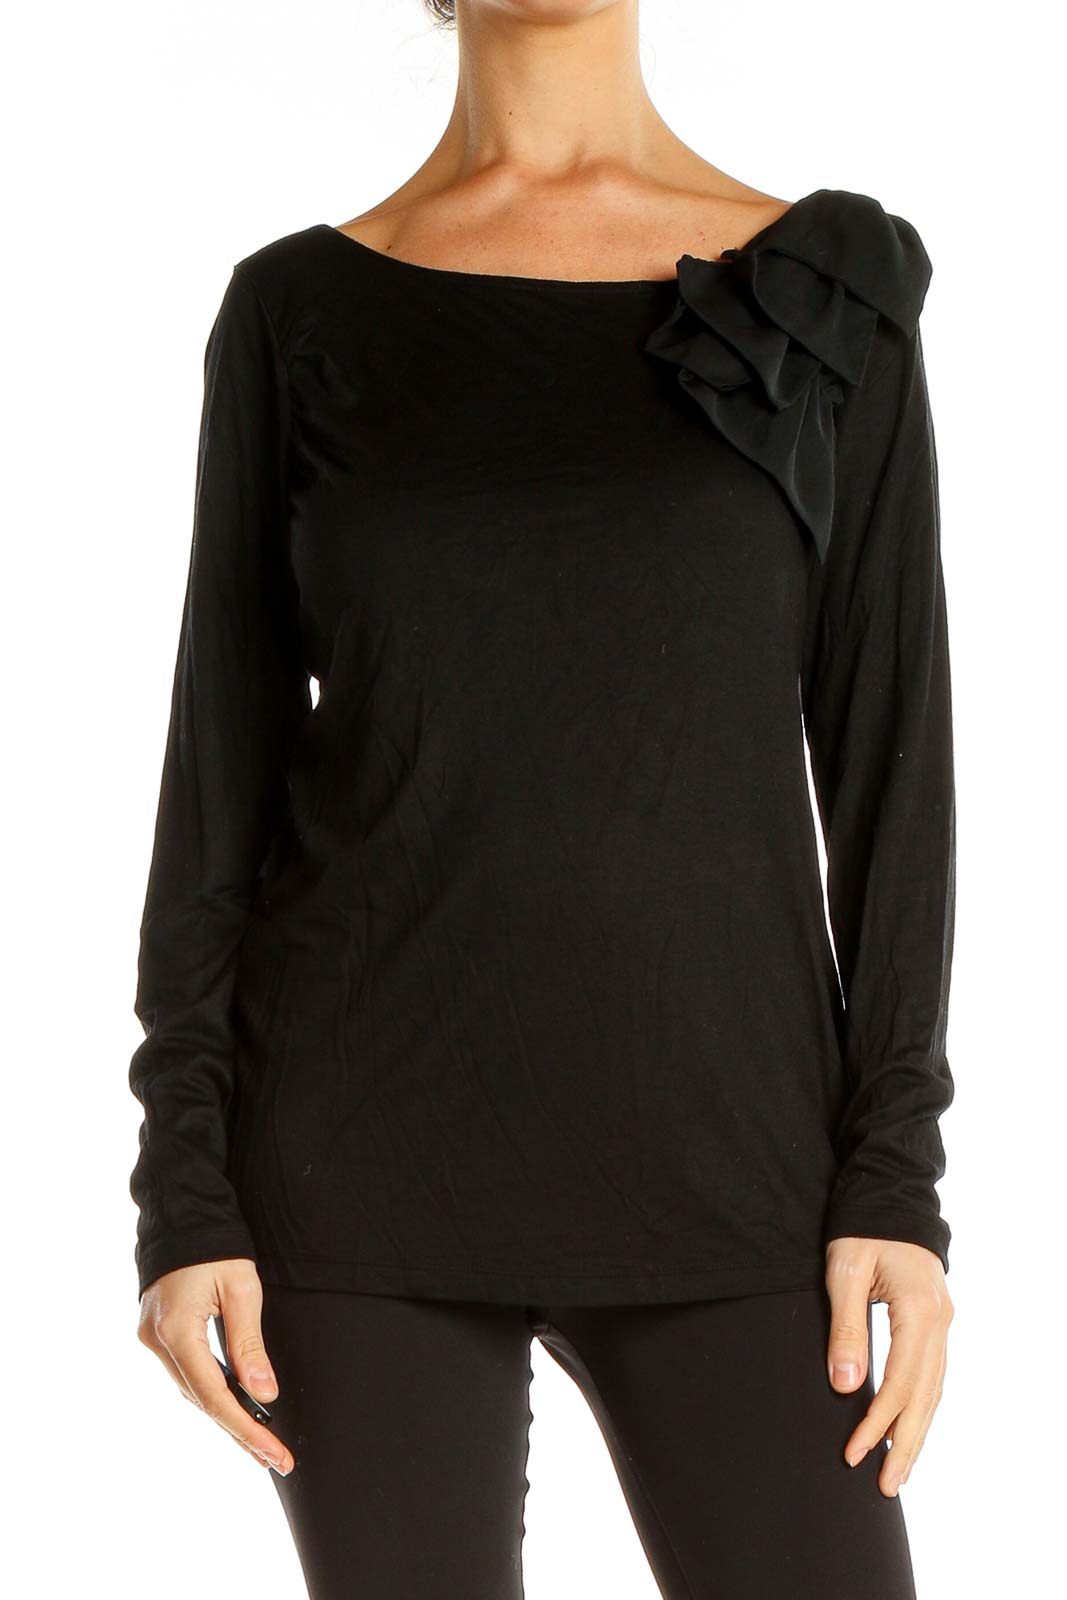 Black Retro Top with Ruffle Sleeve Front